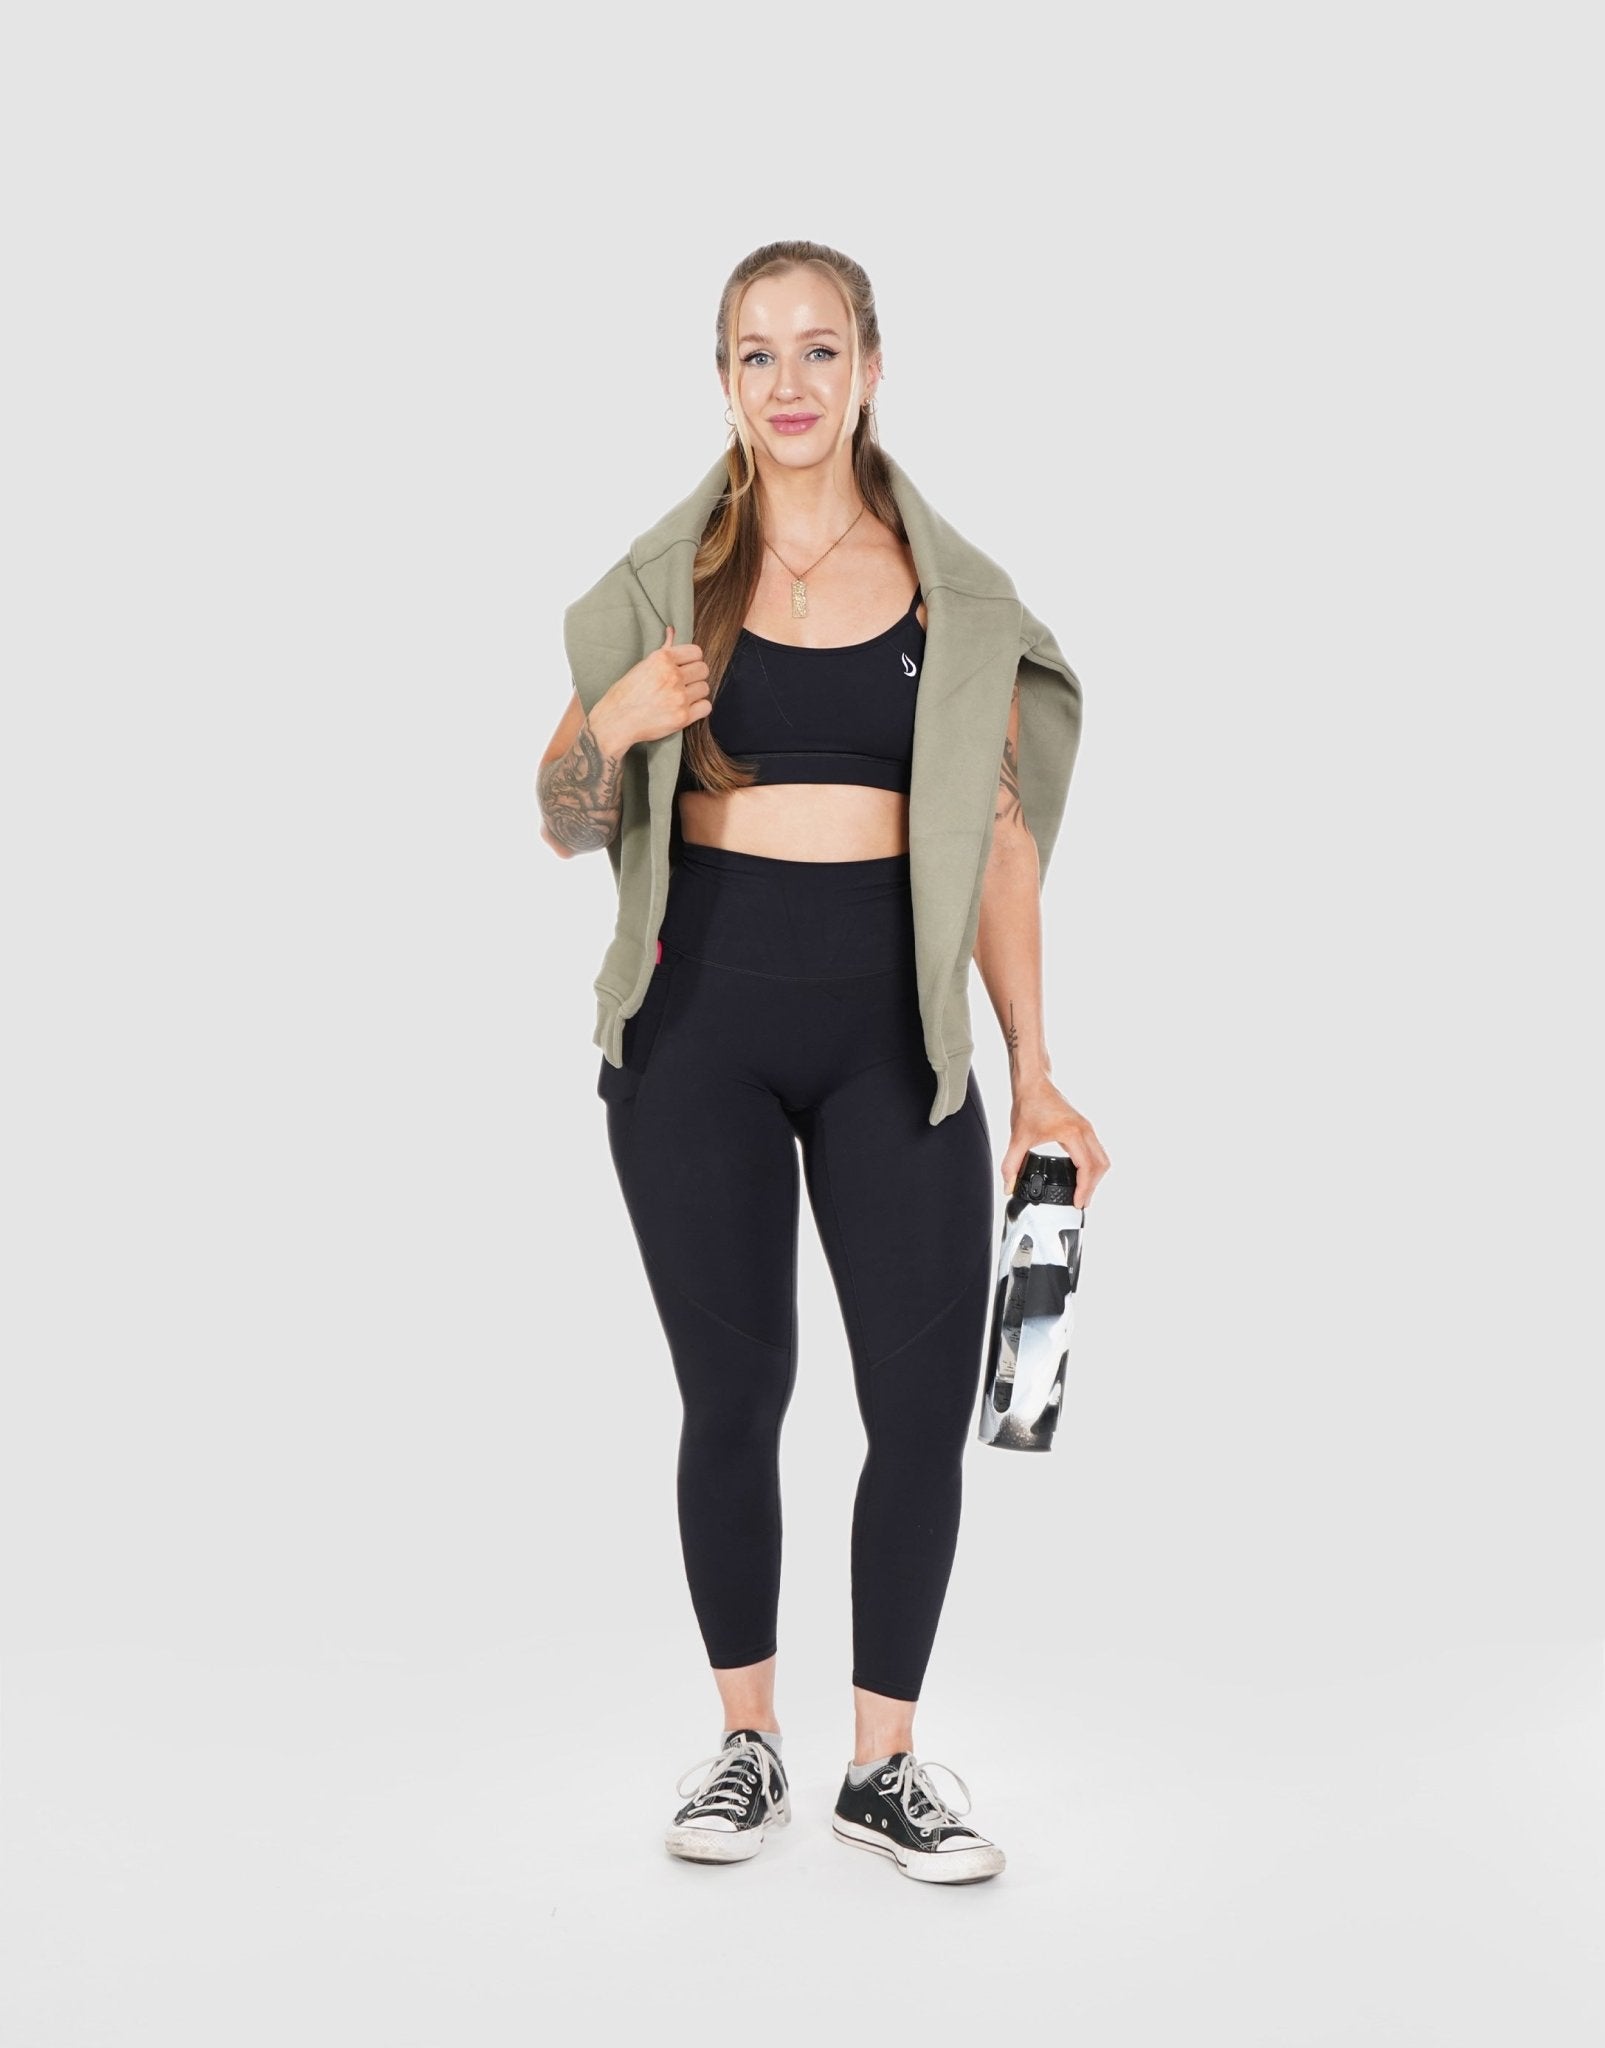 Glow Pocket Legging: Style Meets Function